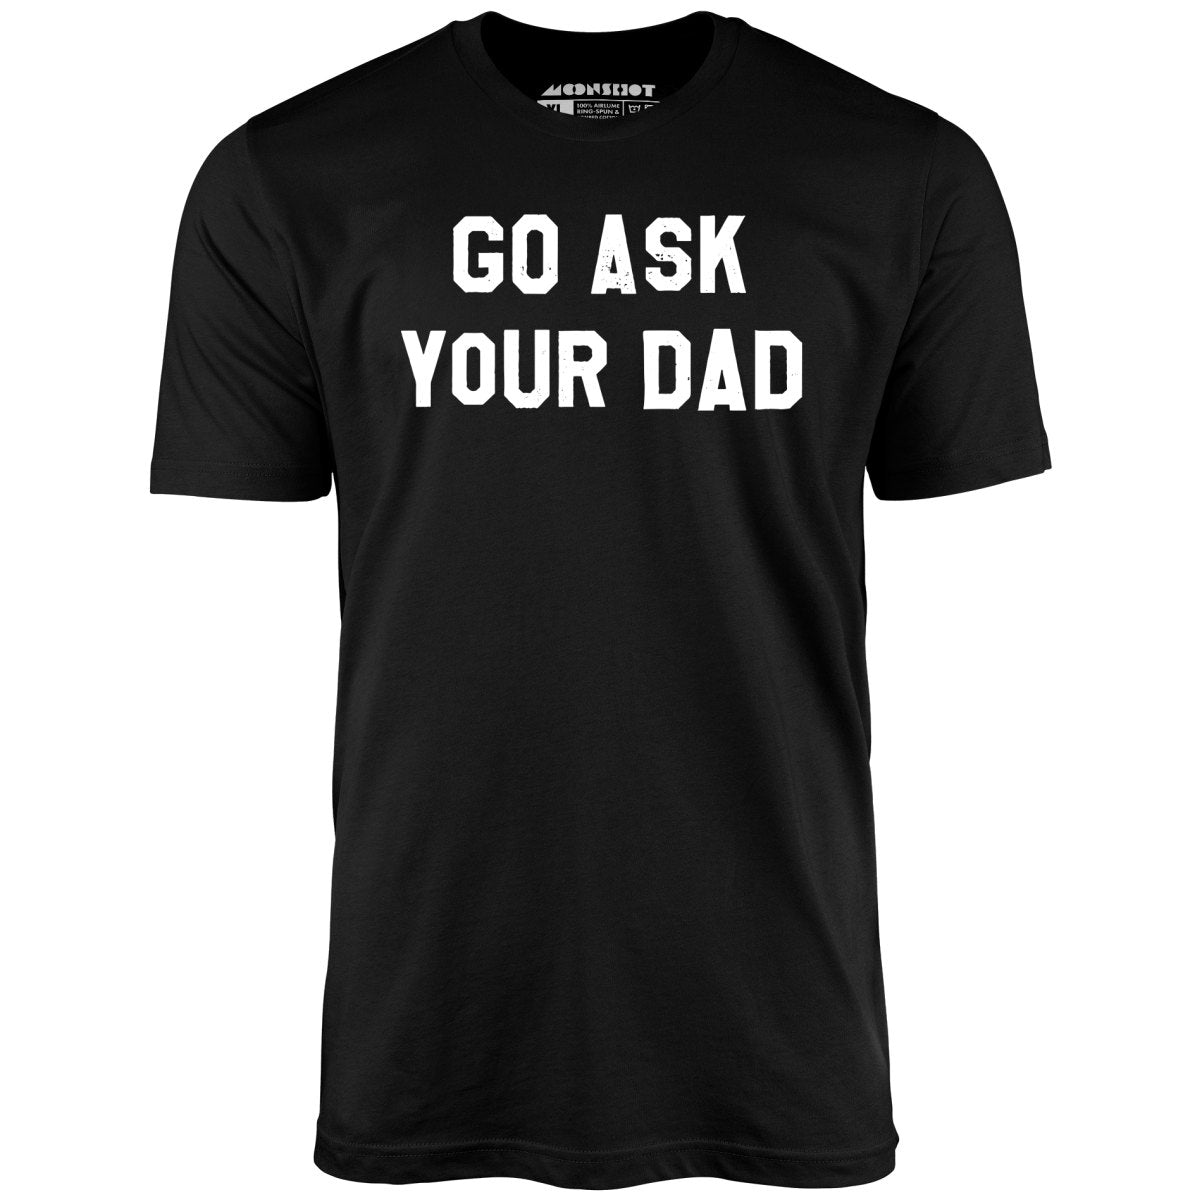 Go Ask Your Dad - Unisex T-Shirt